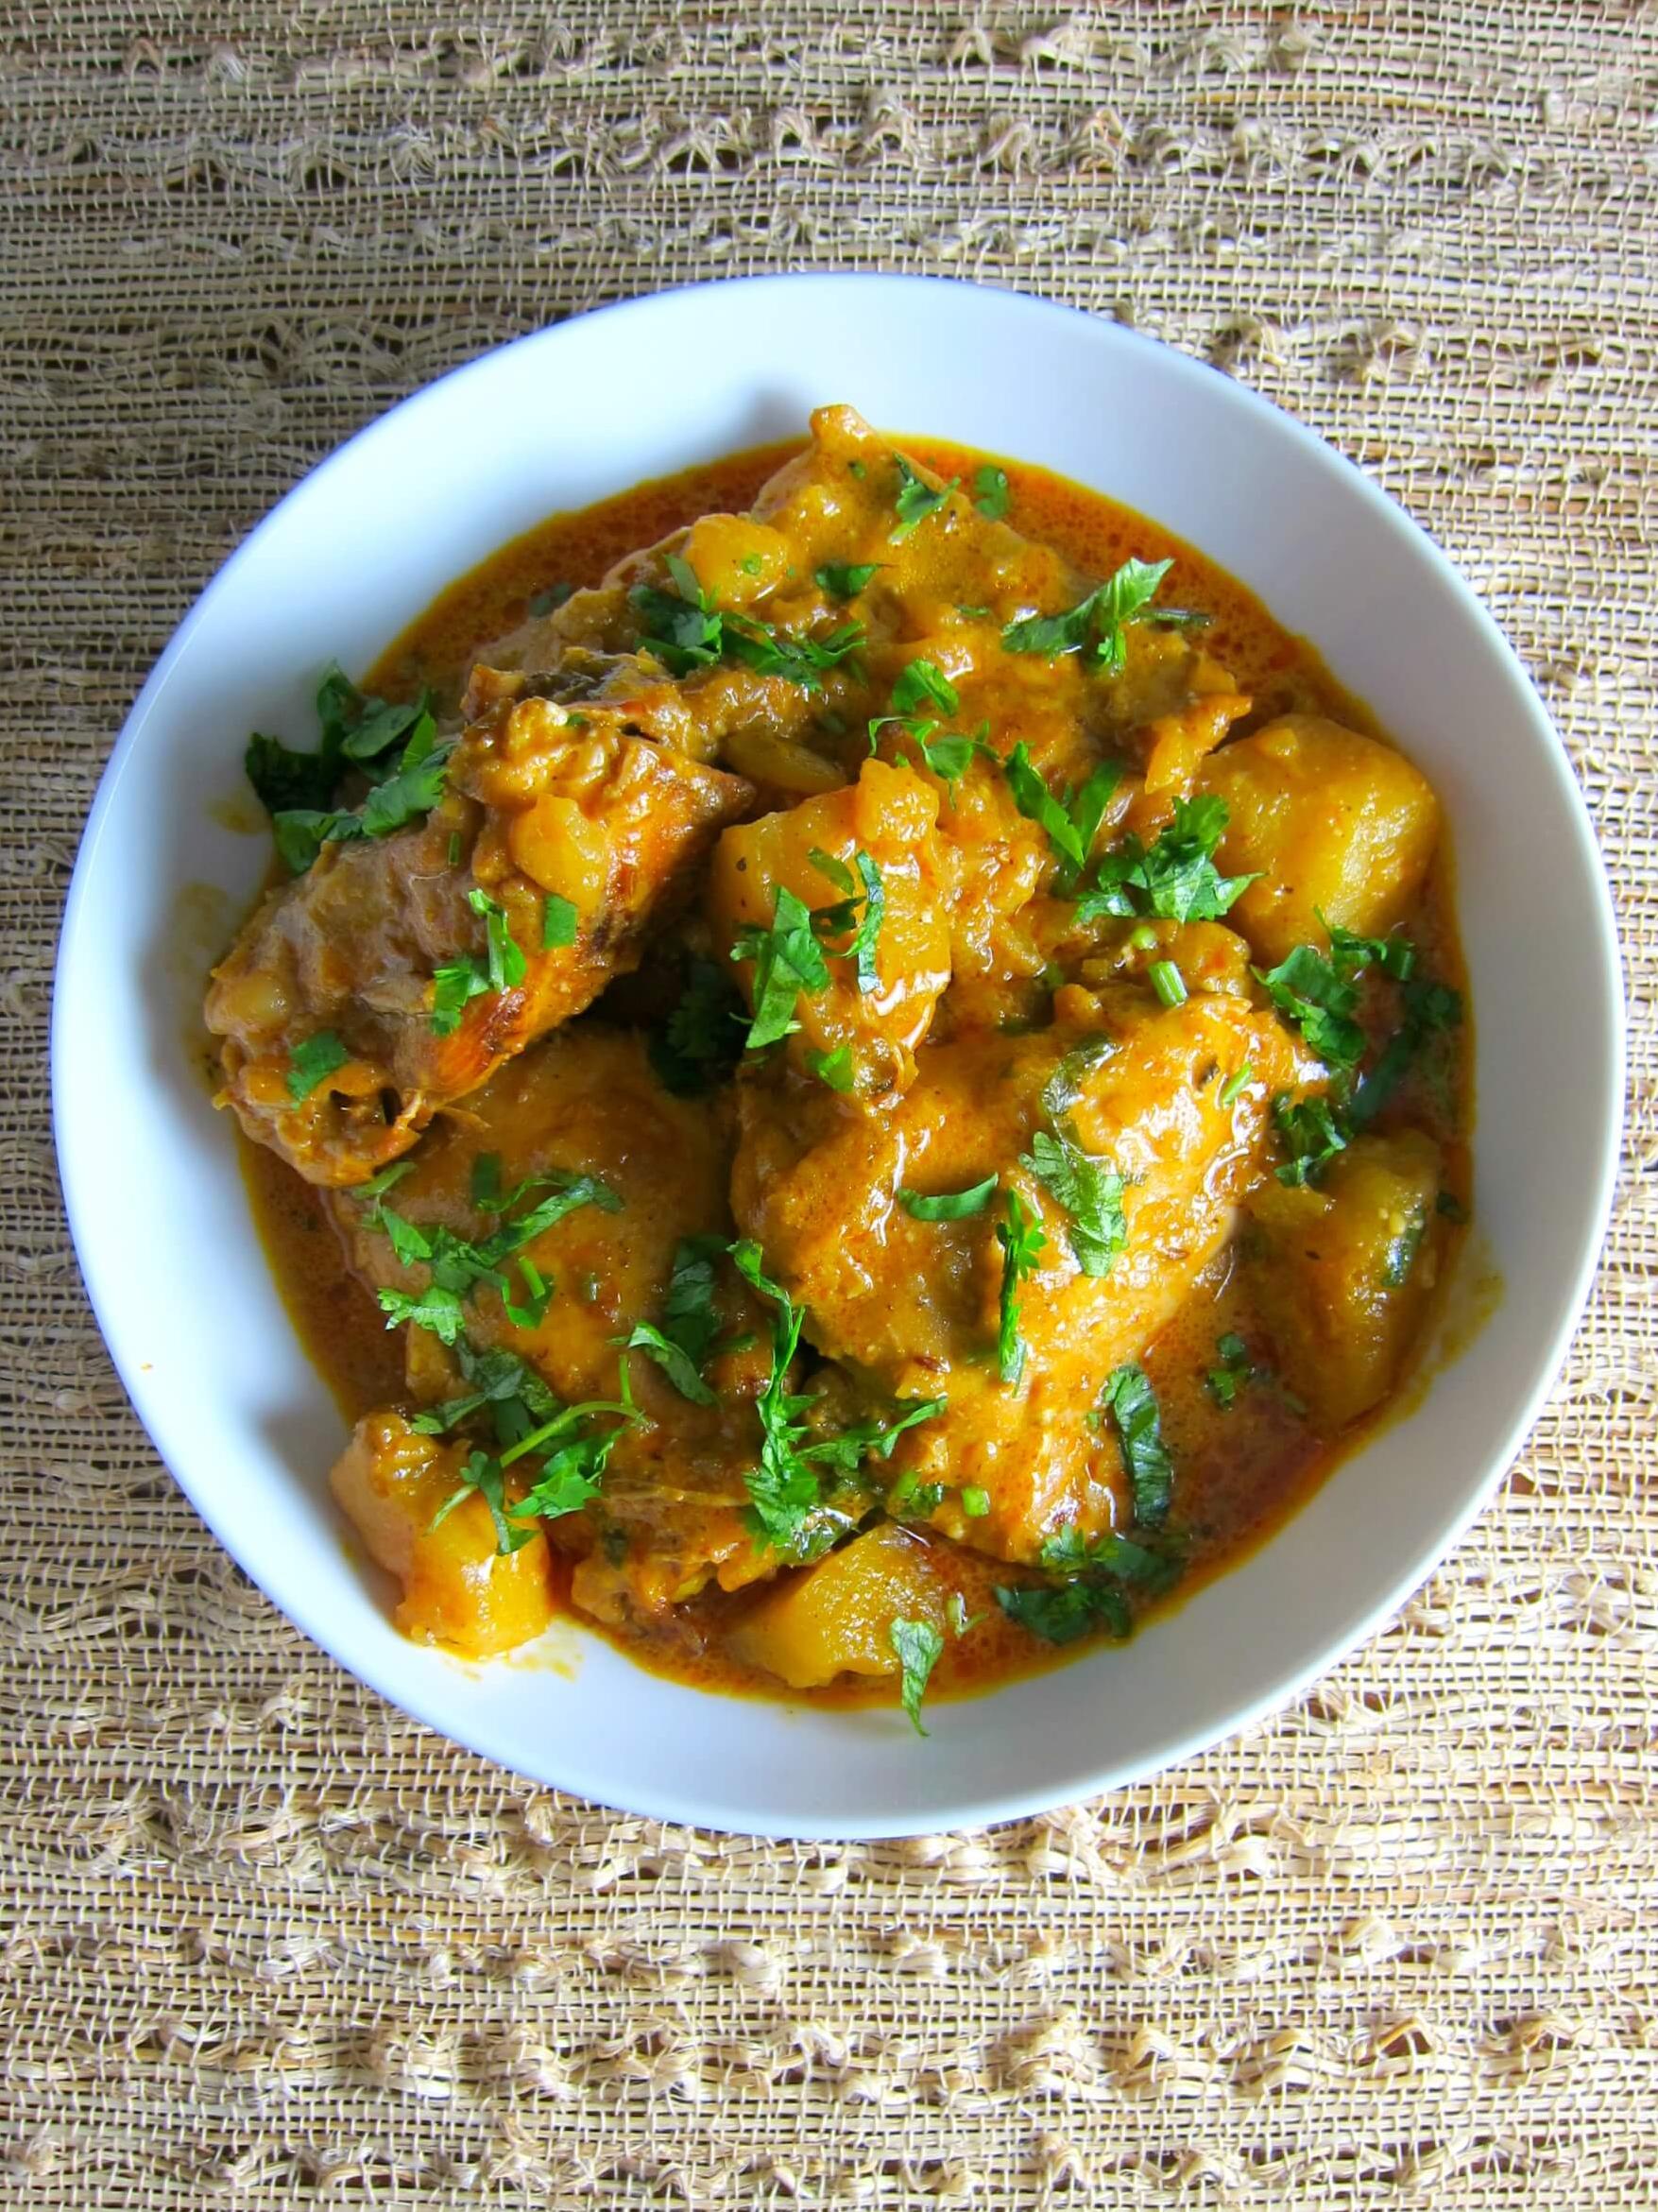  The colorful ingredients blended together to create dishes that feel like comfort food with this Instant Pot Curry Chicken.